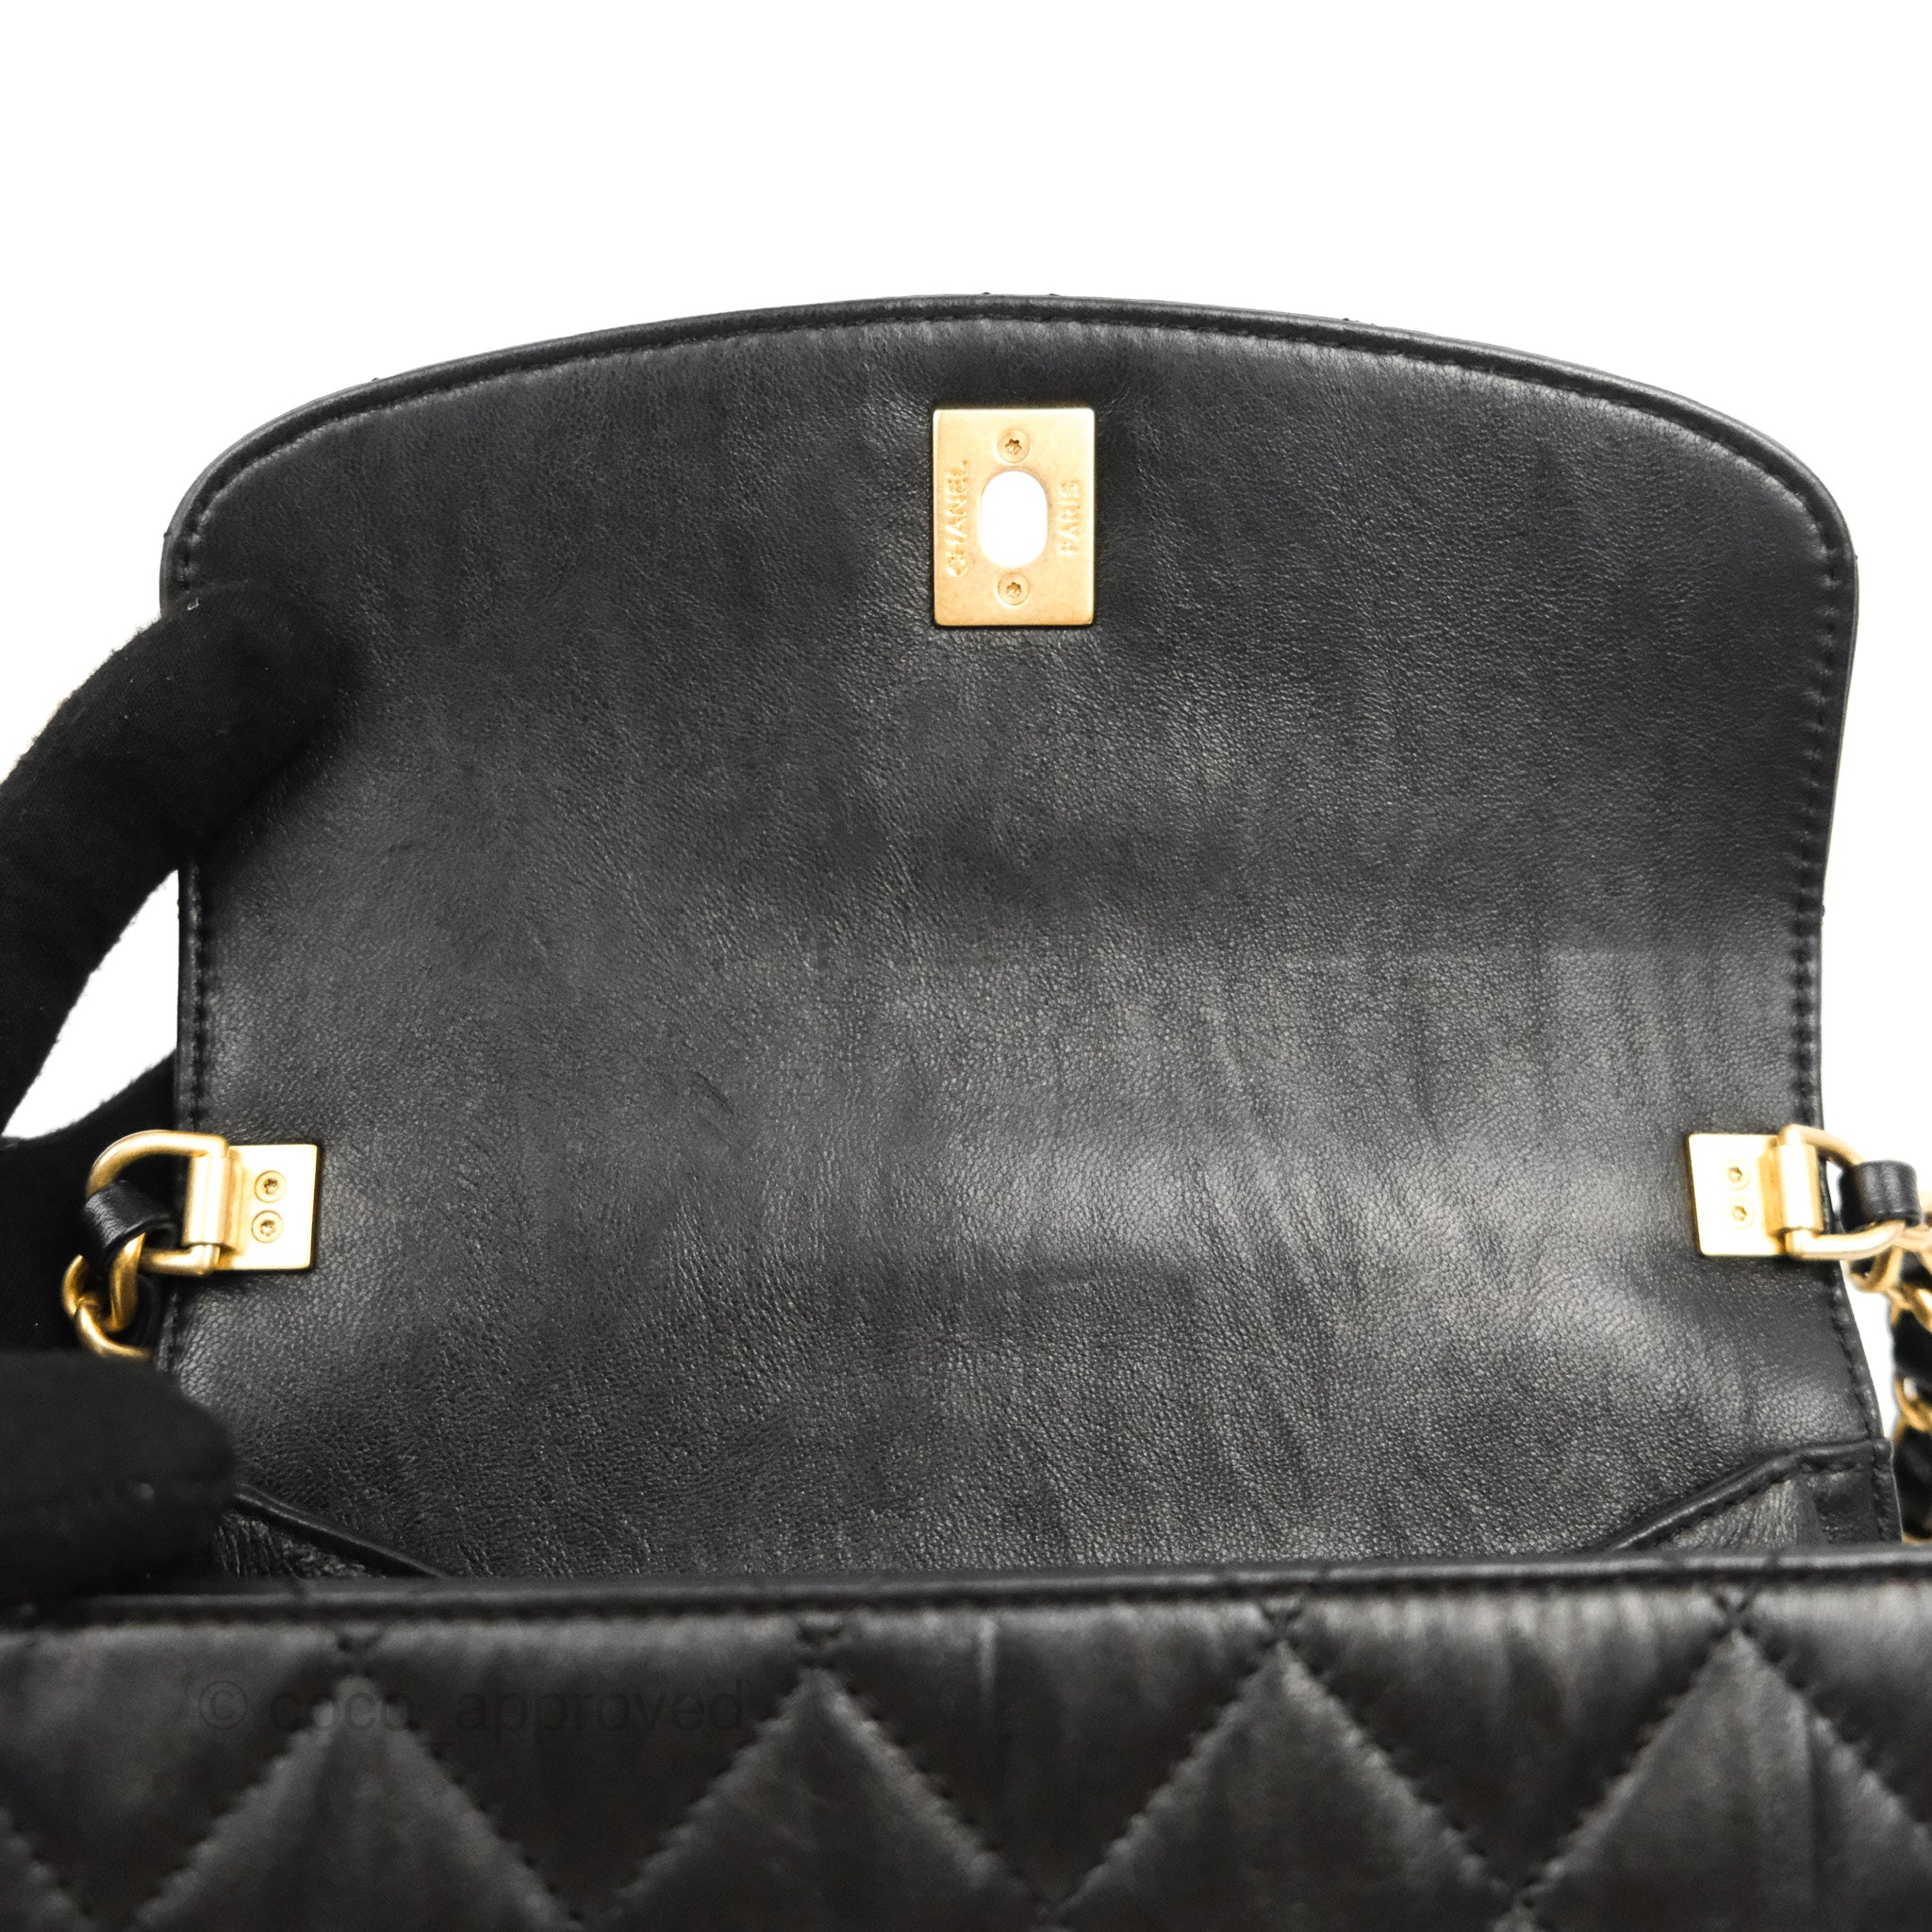 Chanel Mini Flap Bag with Top Handle Black Crumpled Lambskin Aged